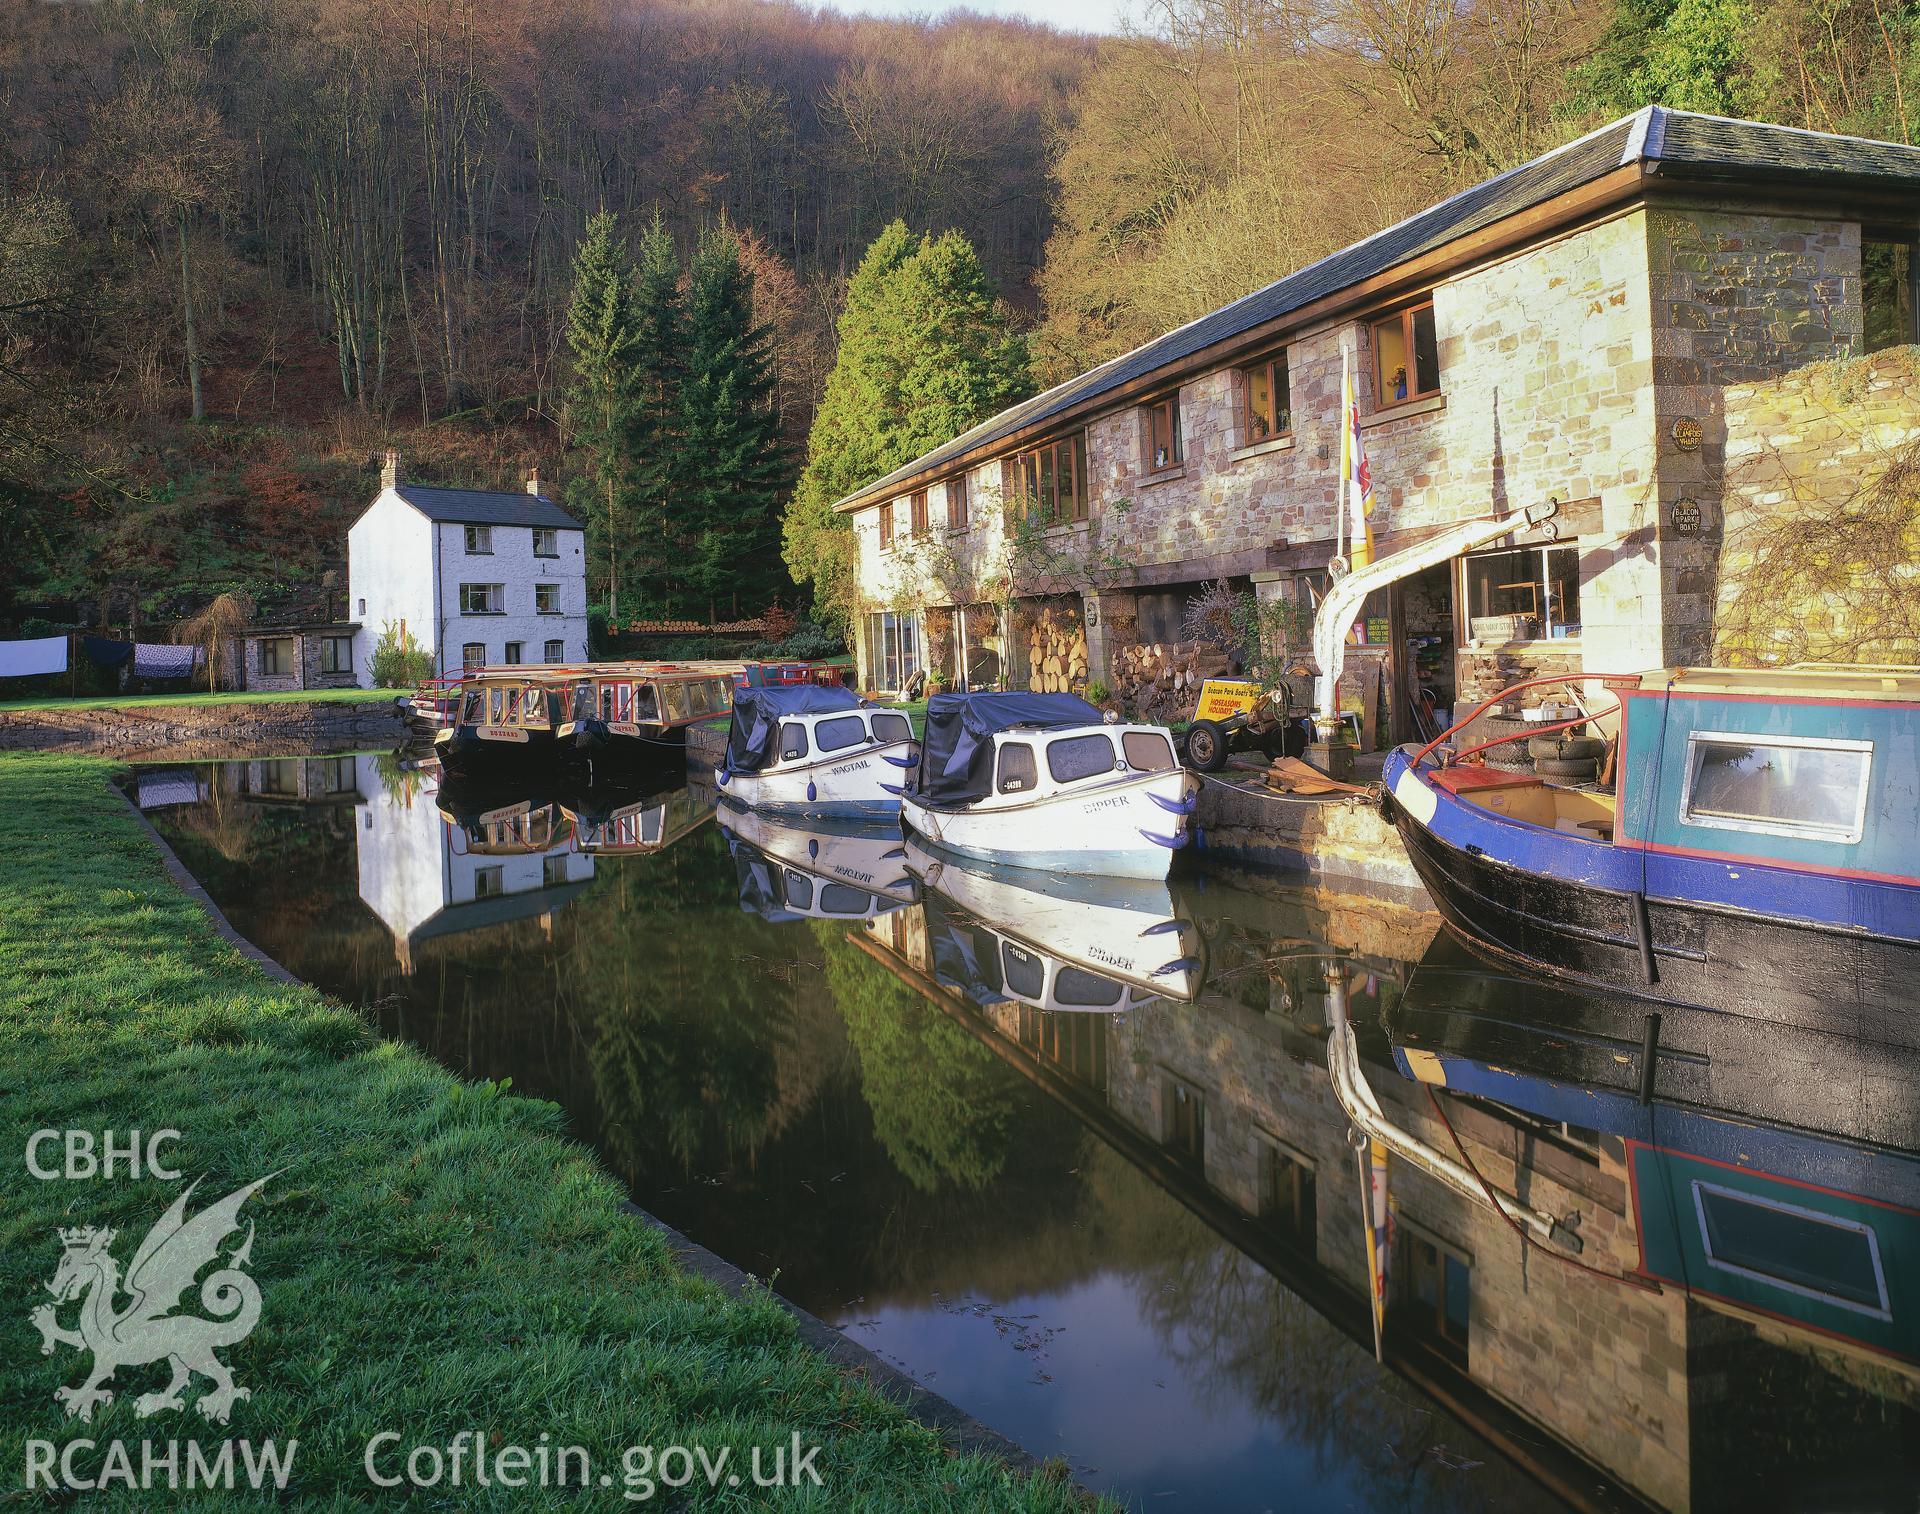 Digitized copy of a colour transparency showing general view of Llanfoist Wharf, Brecknock and Abergavenny Canal taken by Iain Wright, 1999. Original not yet transferred to NMR Archive.